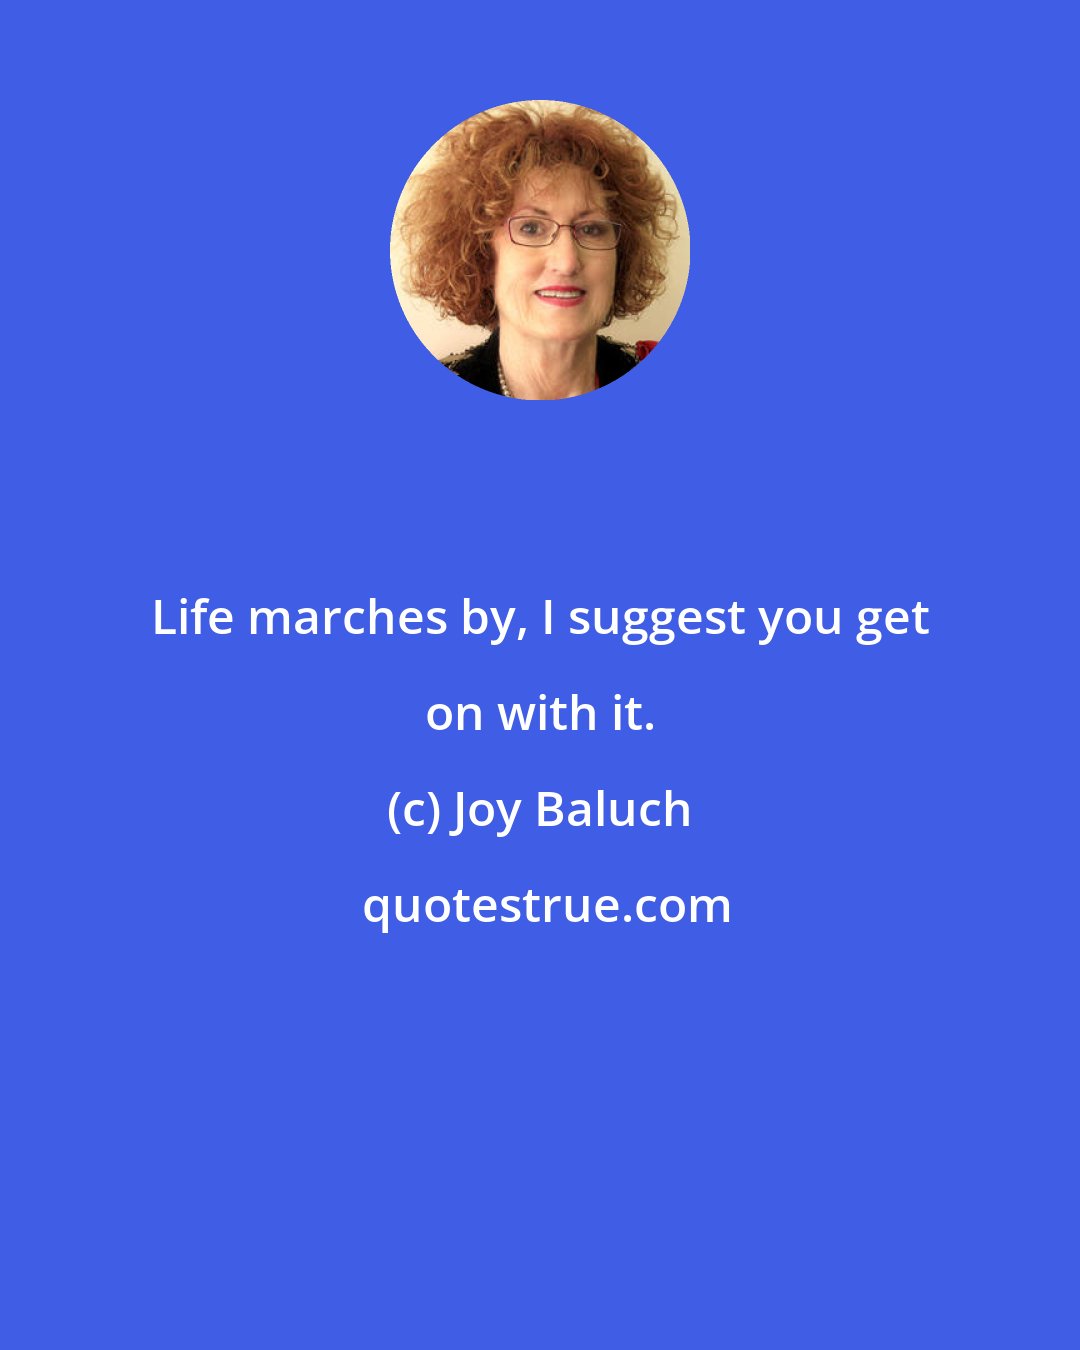 Joy Baluch: Life marches by, I suggest you get on with it.